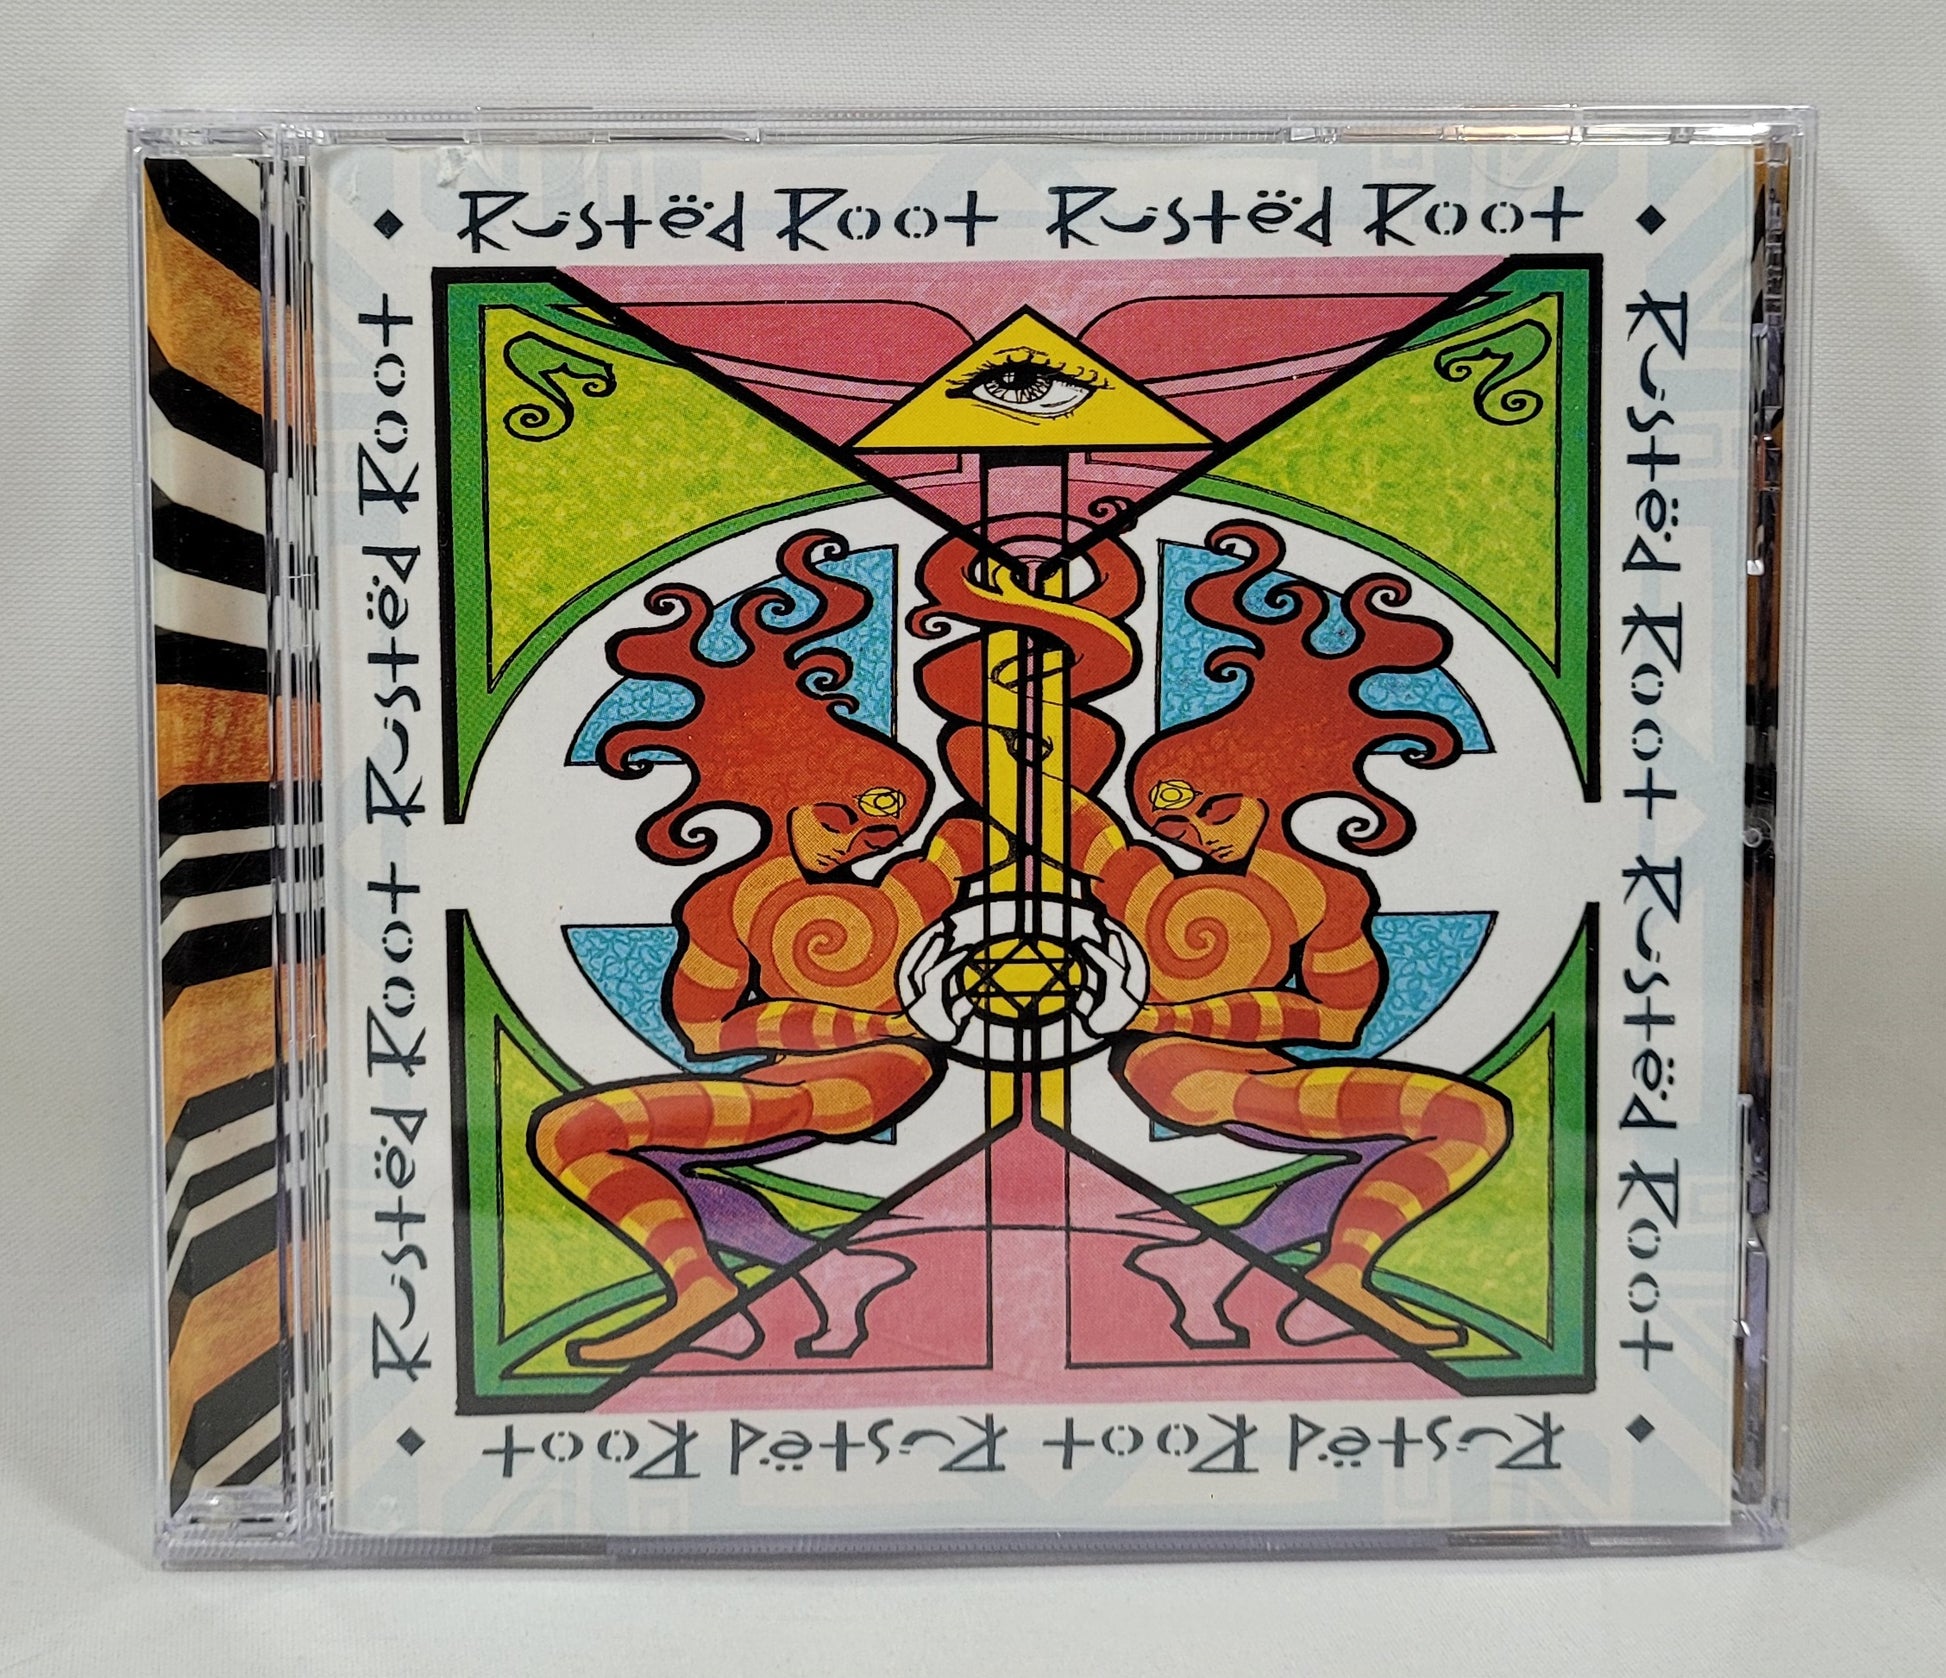 Rusted Root - Rusted Root [1998 Club Edition] [Used CD]